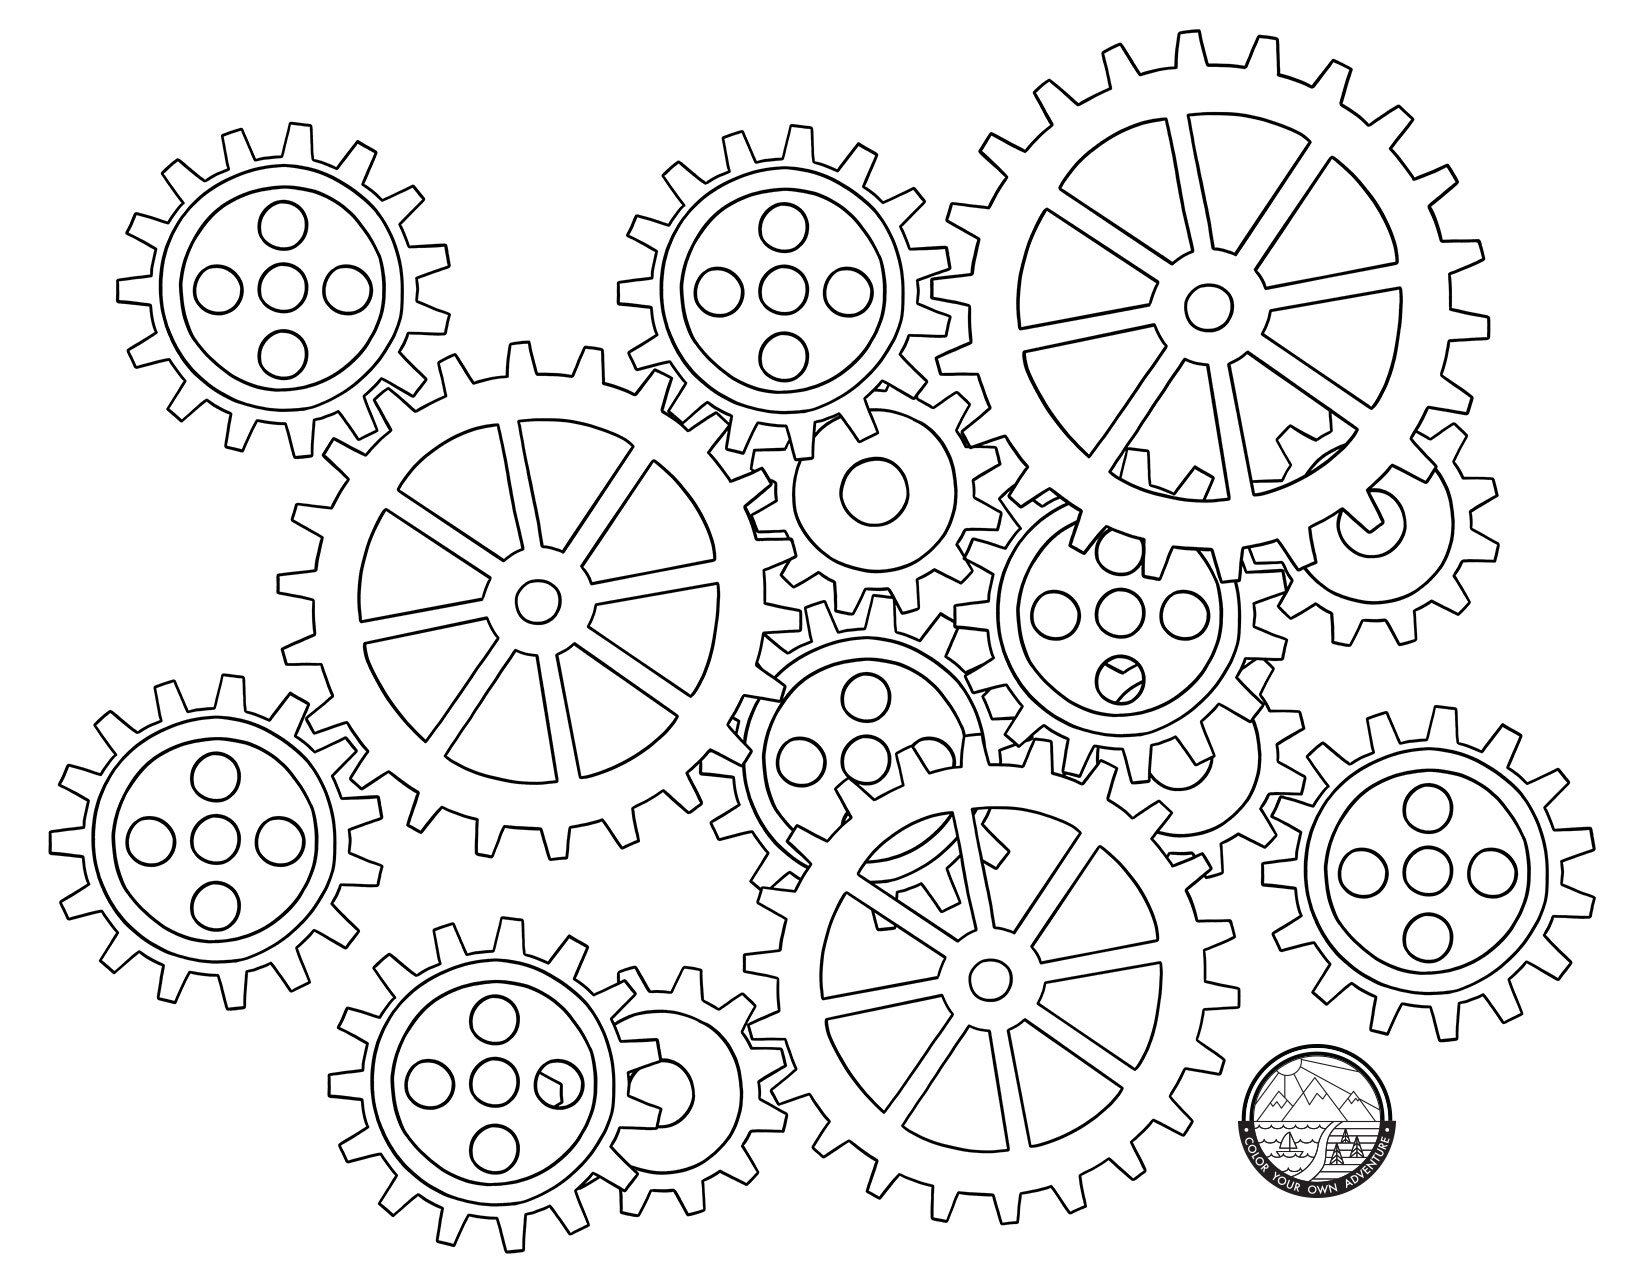 Get in Gear Coloring Page